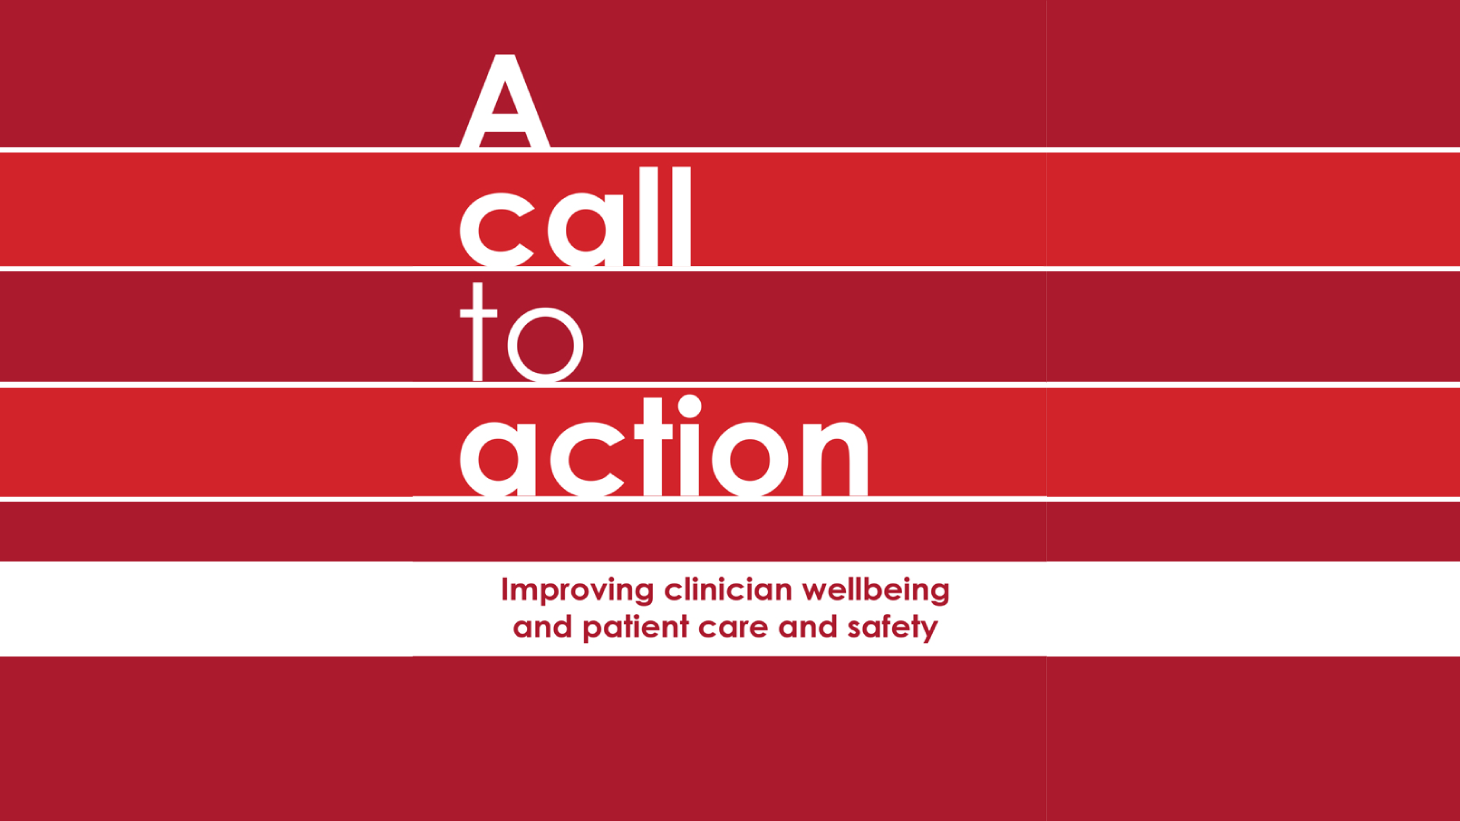 New policy brief urges action to address burnout in healthcare professionals